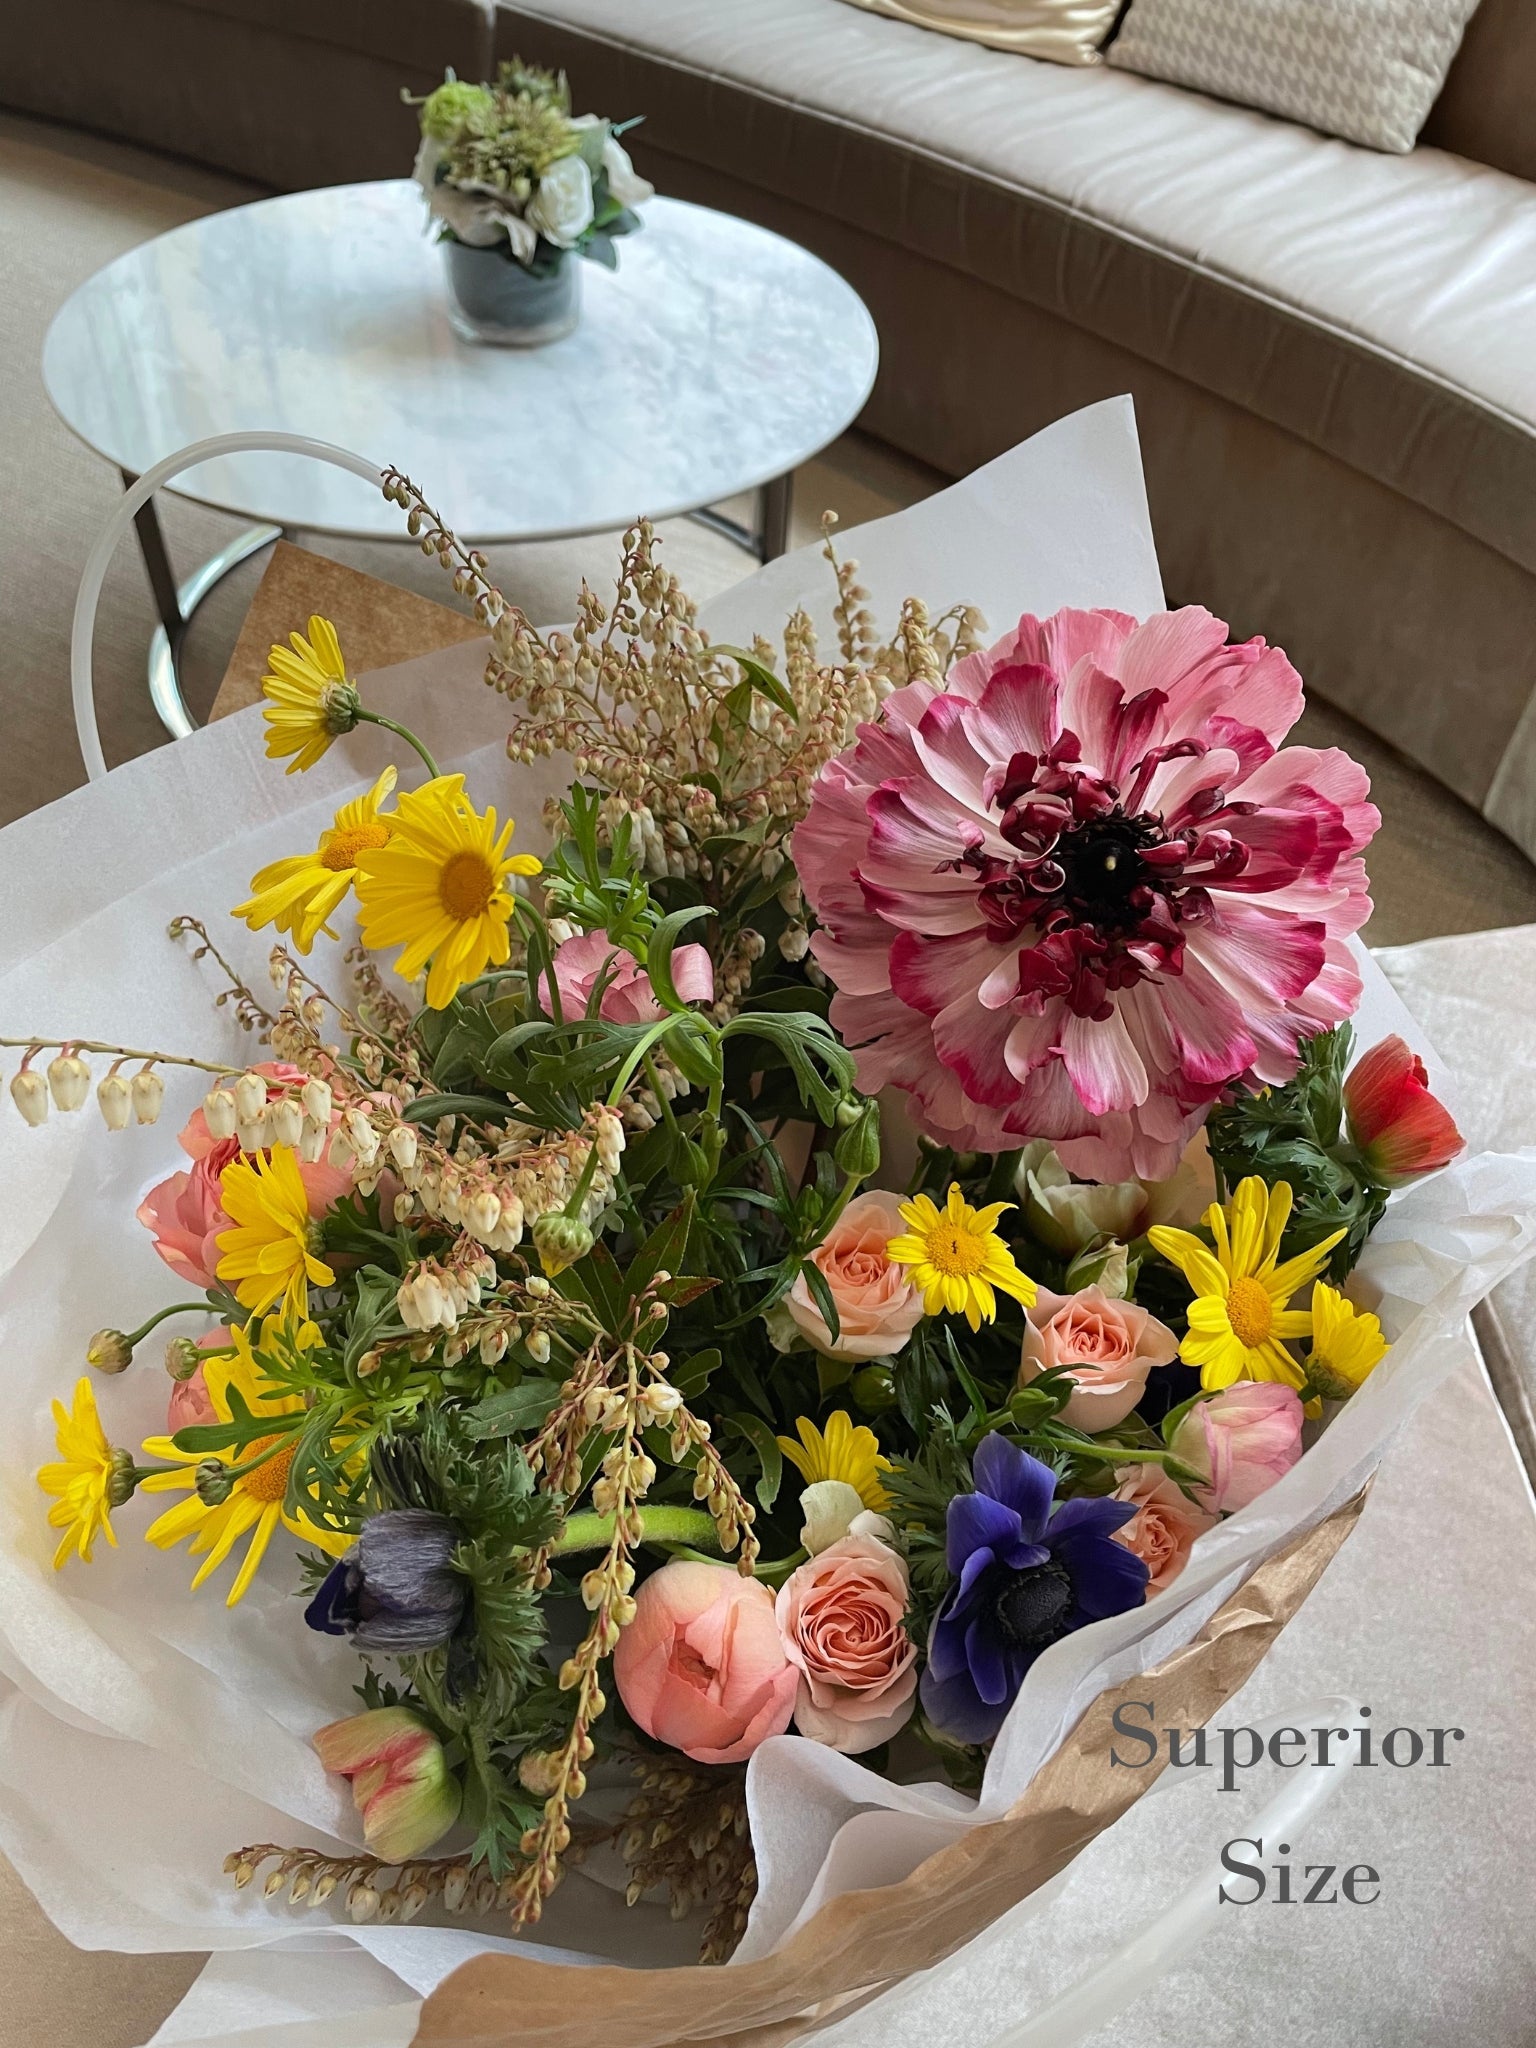 Weekly Flower Subscription - Standard - - Subscription - - 5